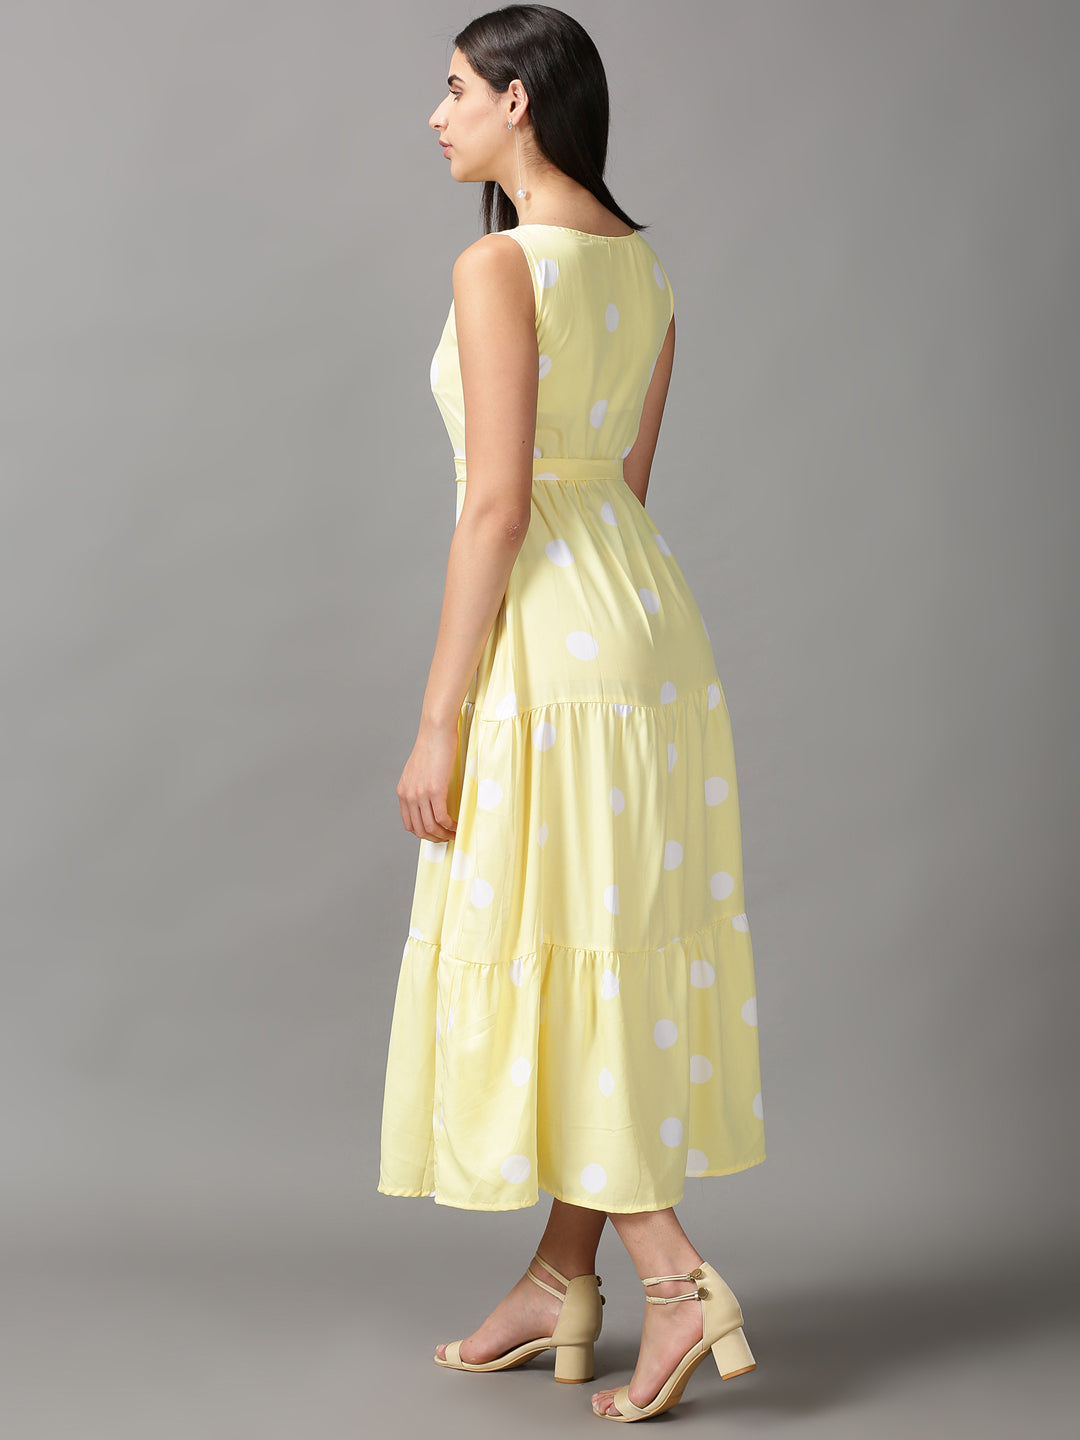 Women's Yellow Polka Dots Fit and Flare Dress